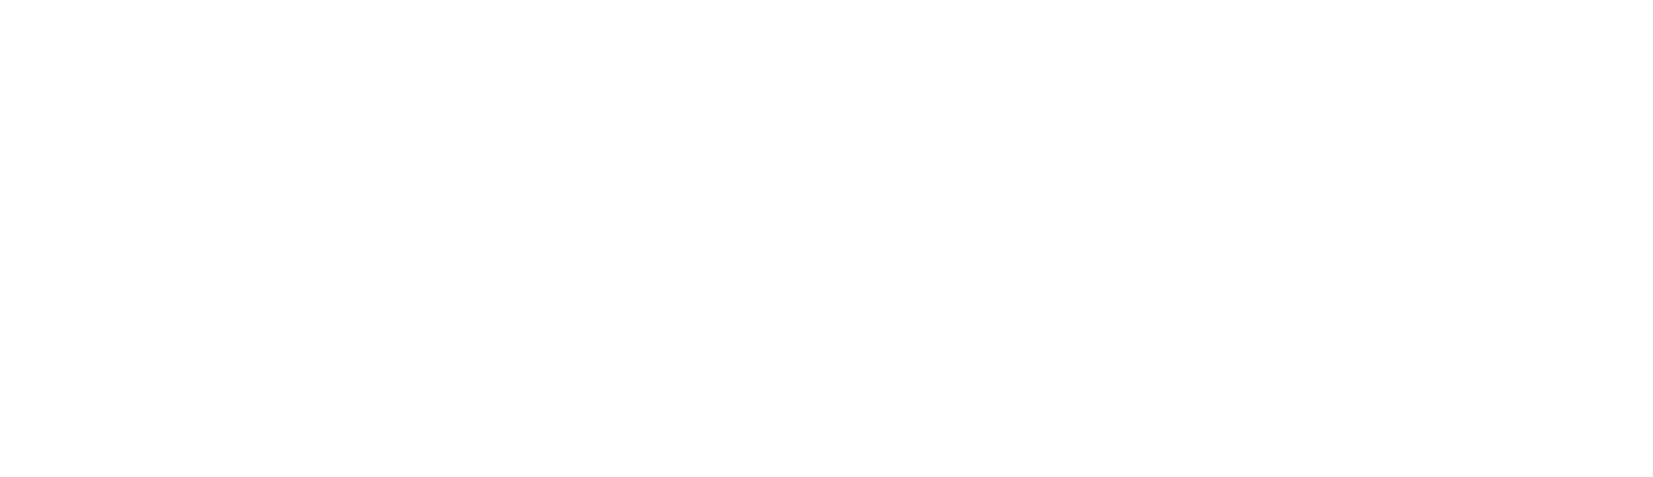 Positively Powering Brands